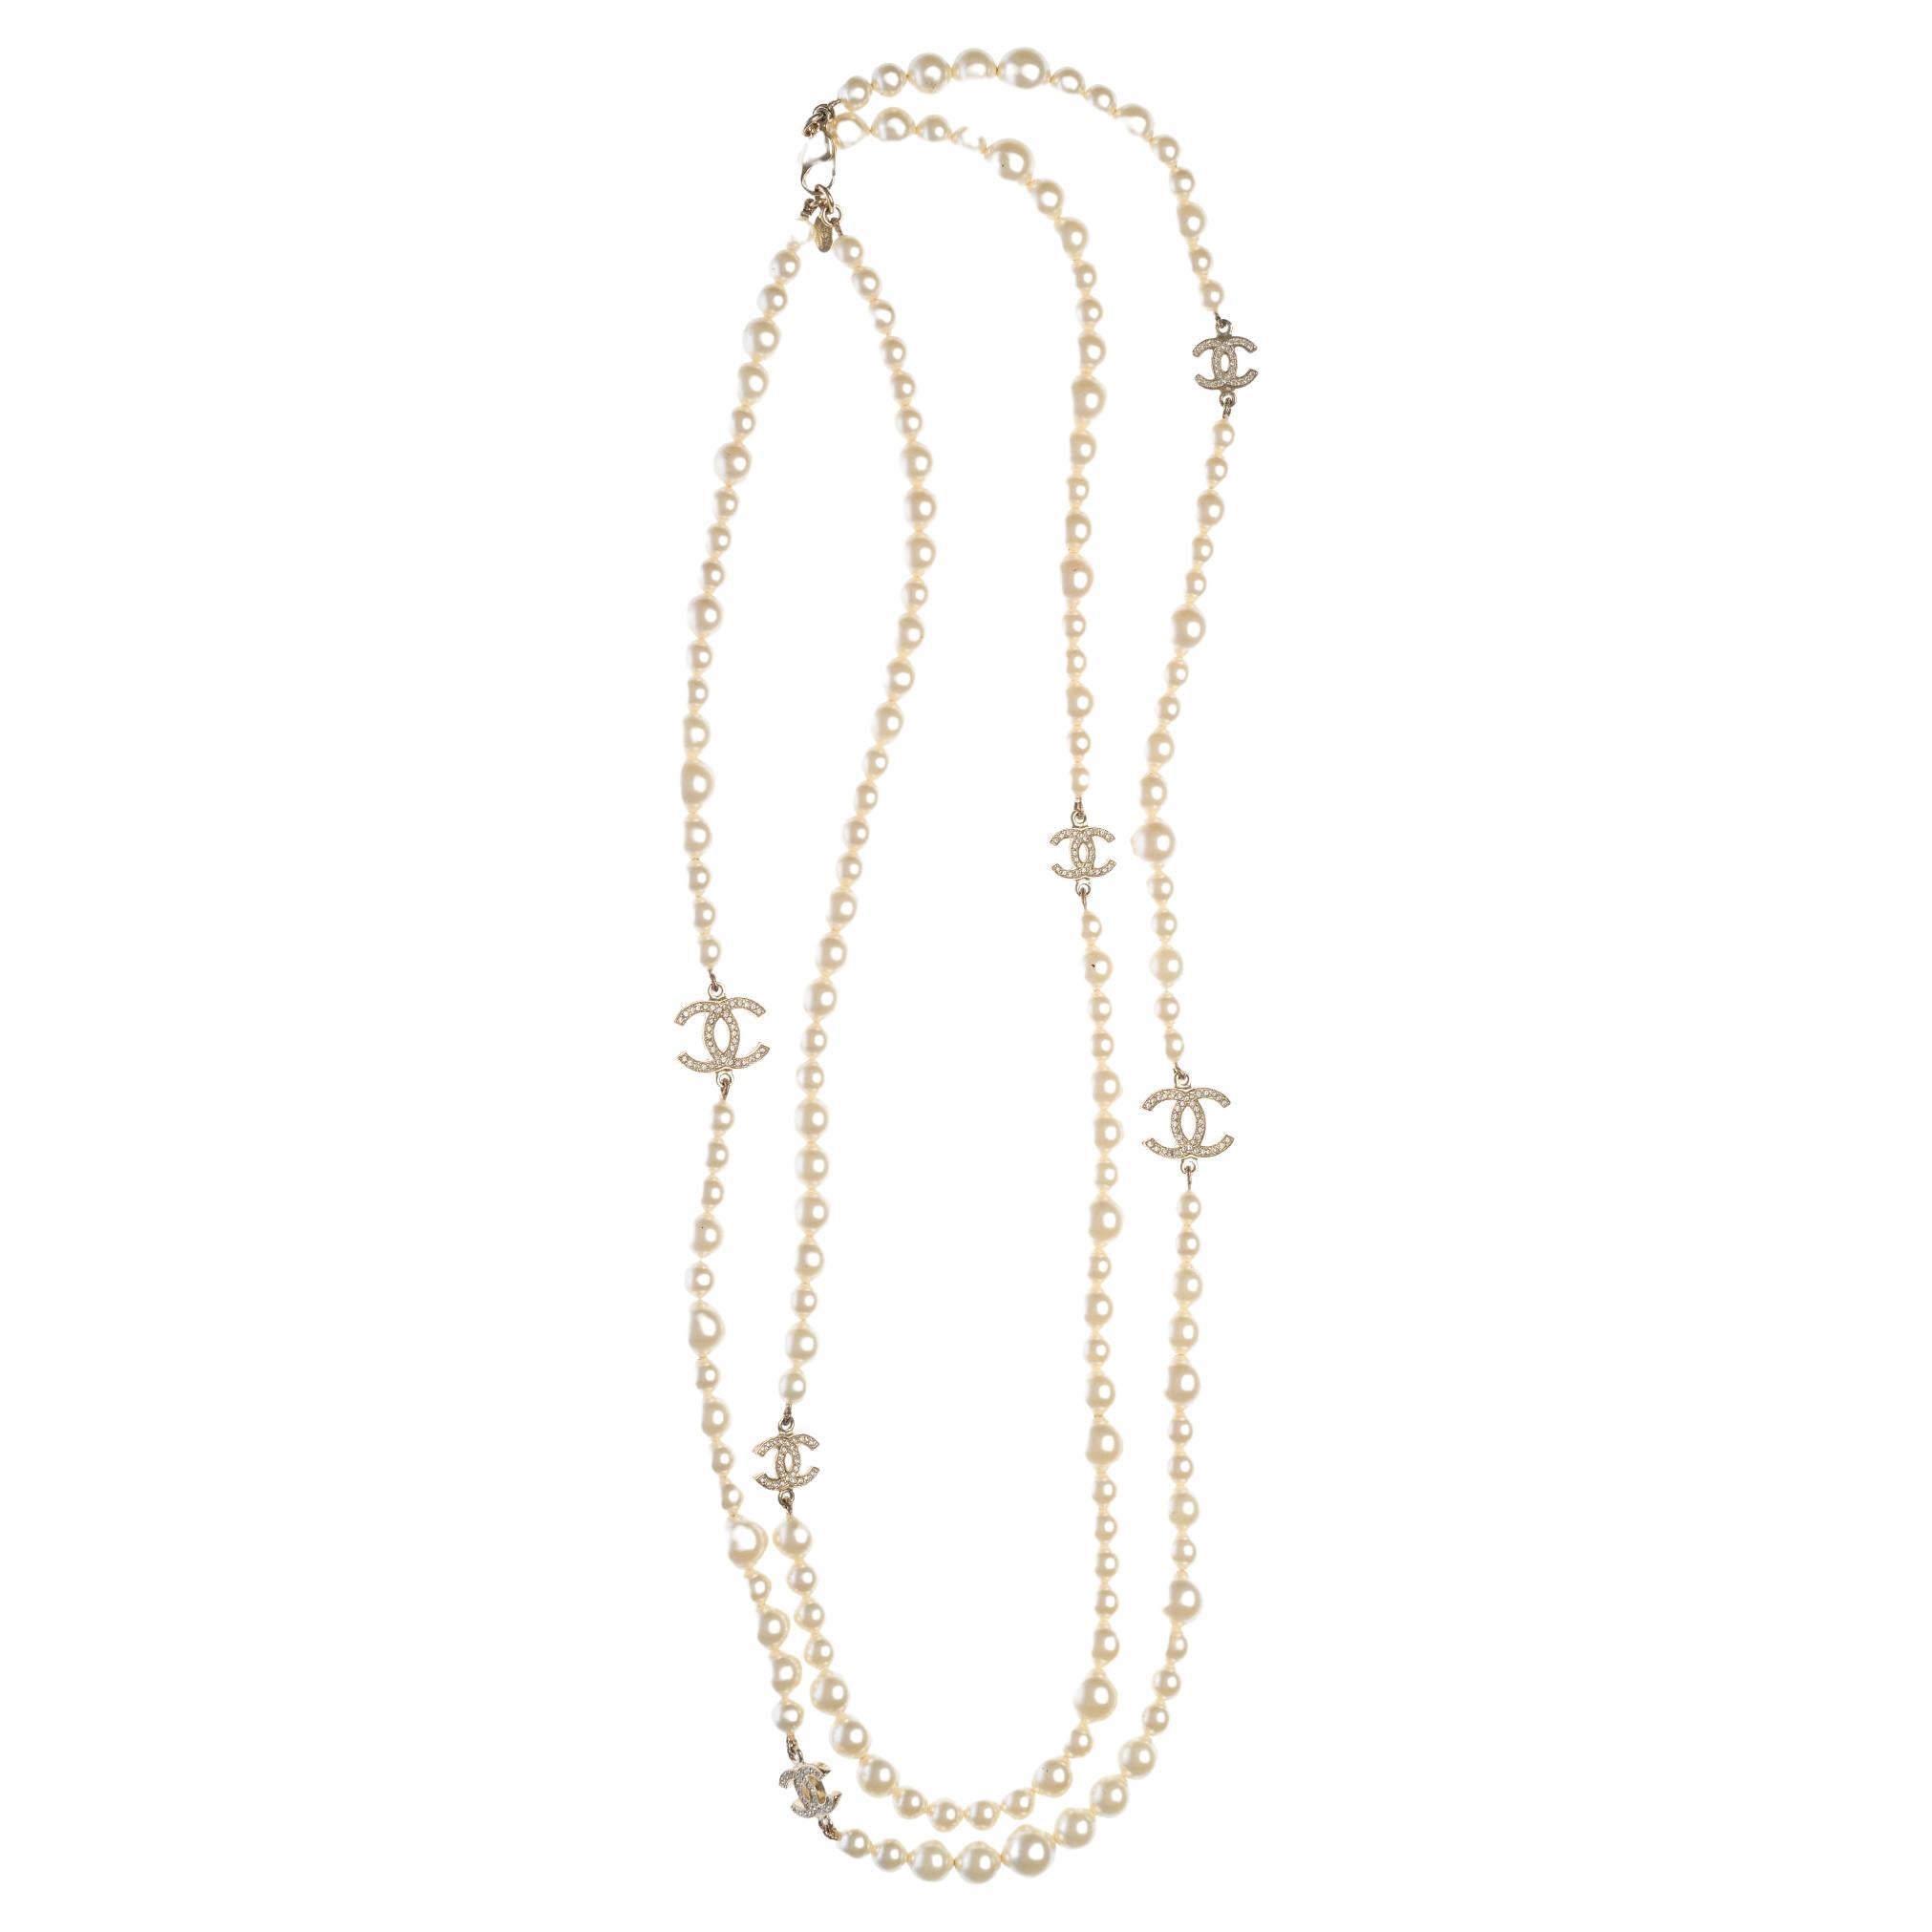 Amazing Chanel Necklace with pearl and gold metal hardware